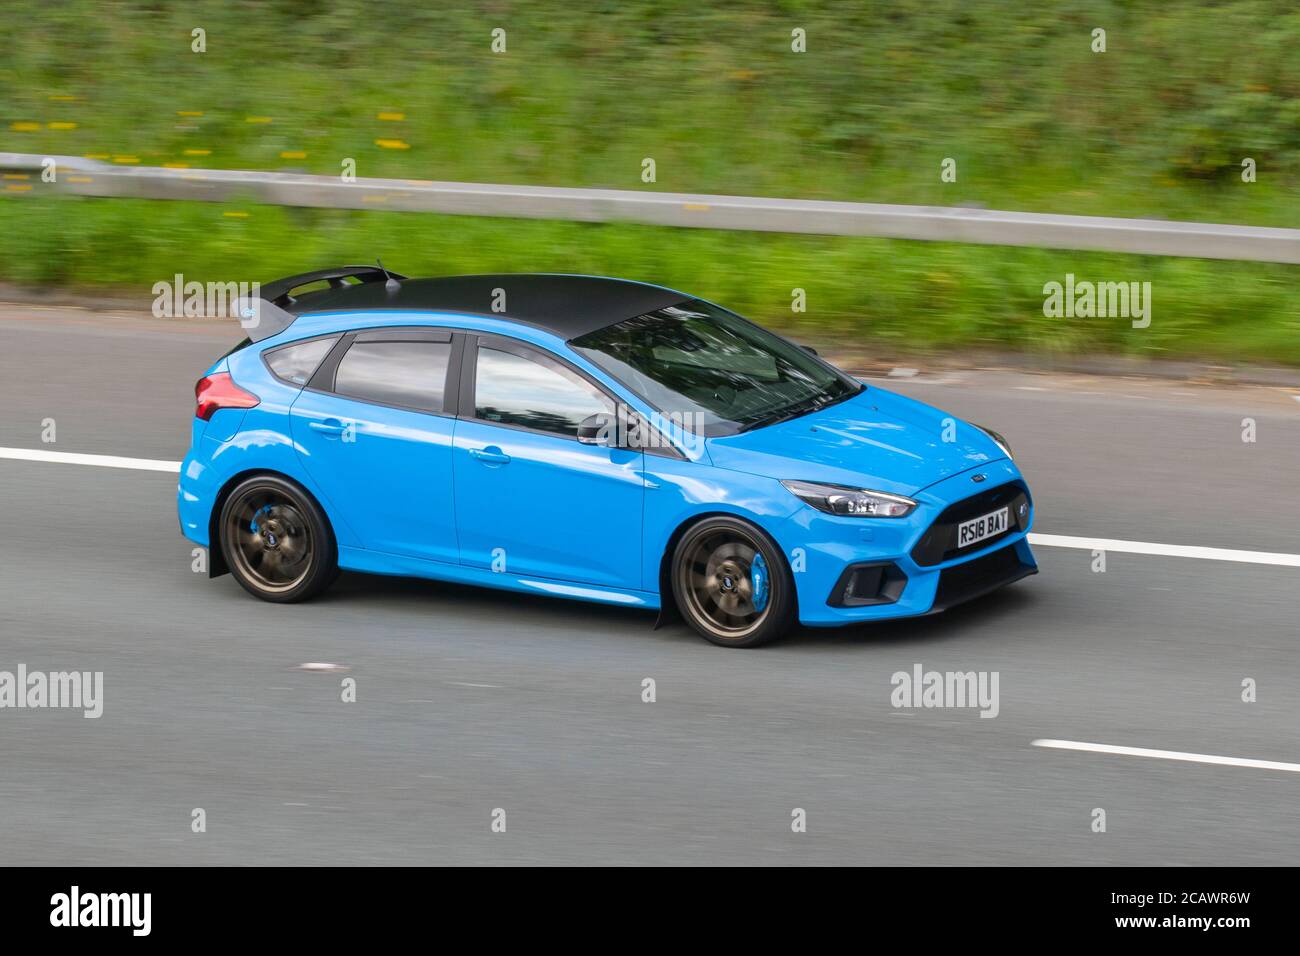 2018 Blue Ford Focus RS Edition 4X4 with spoiler; Vehicular traffic moving vehicles, cars driving vehicle on UK roads, motors, motoring on the M6 motorway highway network. Stock Photo